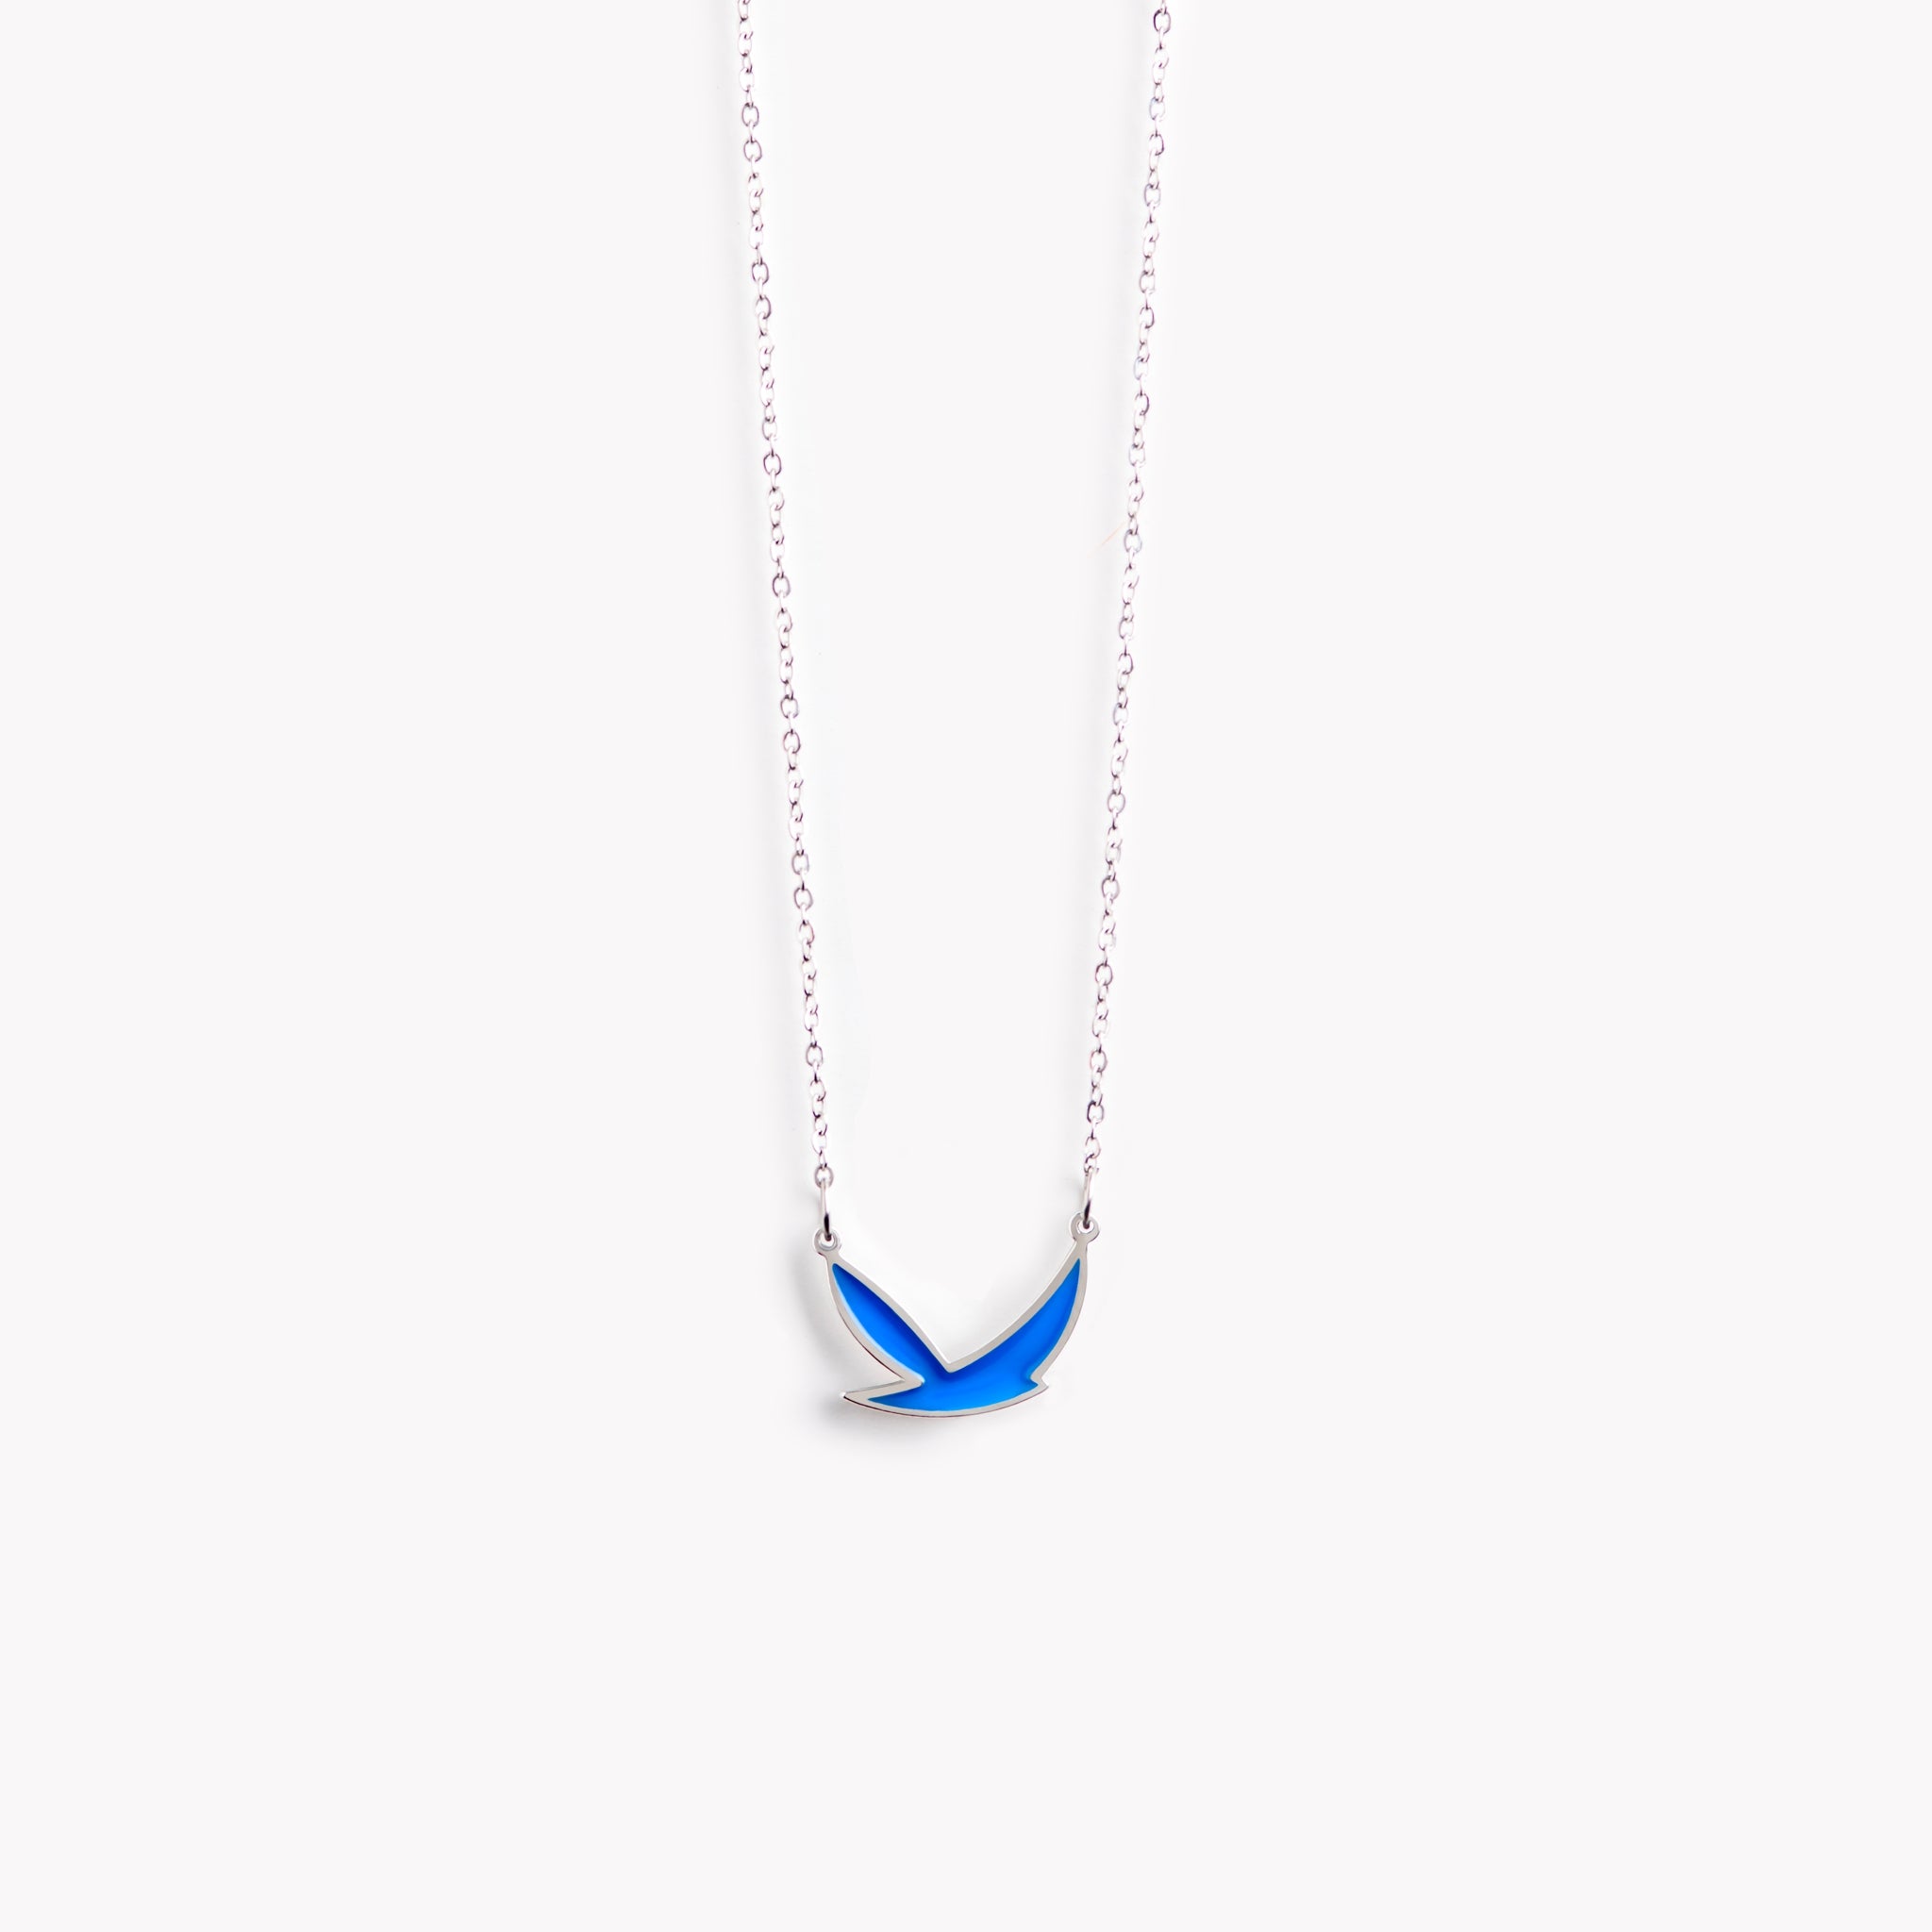 A simple, stylish, and dynamic blue bird necklace.